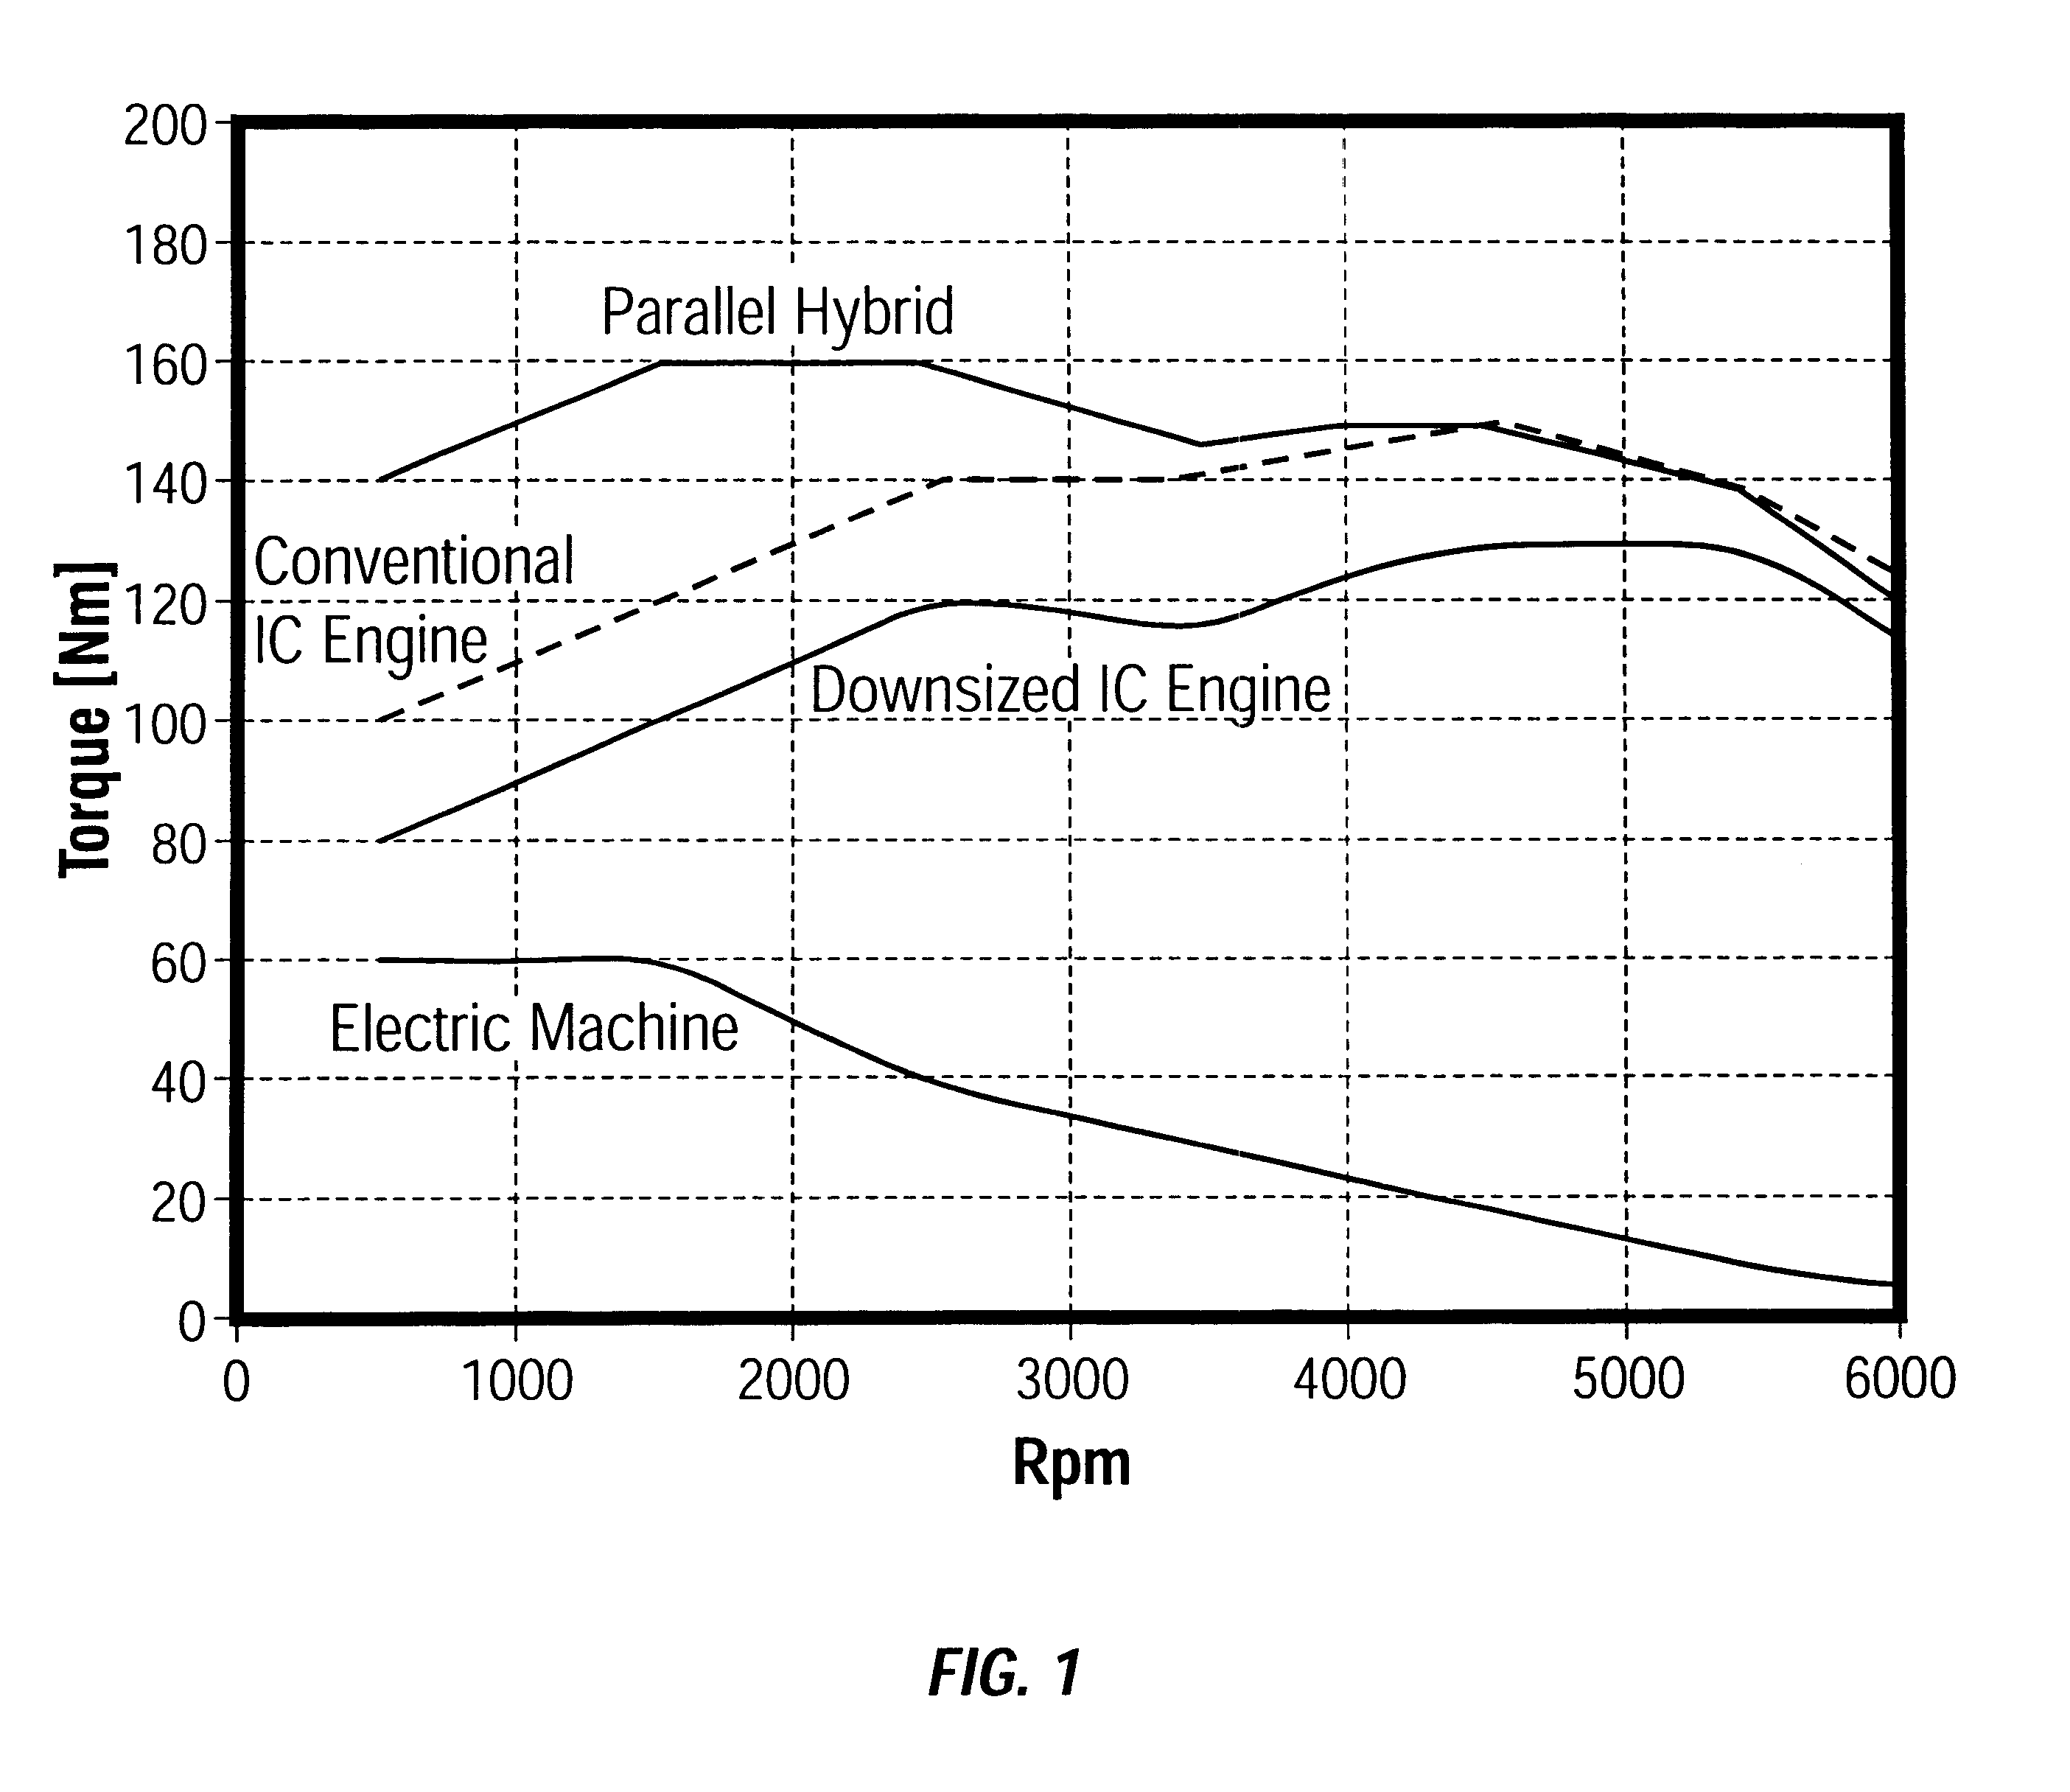 Method and arrangement in a hybrid vehicle for improving battery state-of-charge control and minimizing driver perceptible disturbances